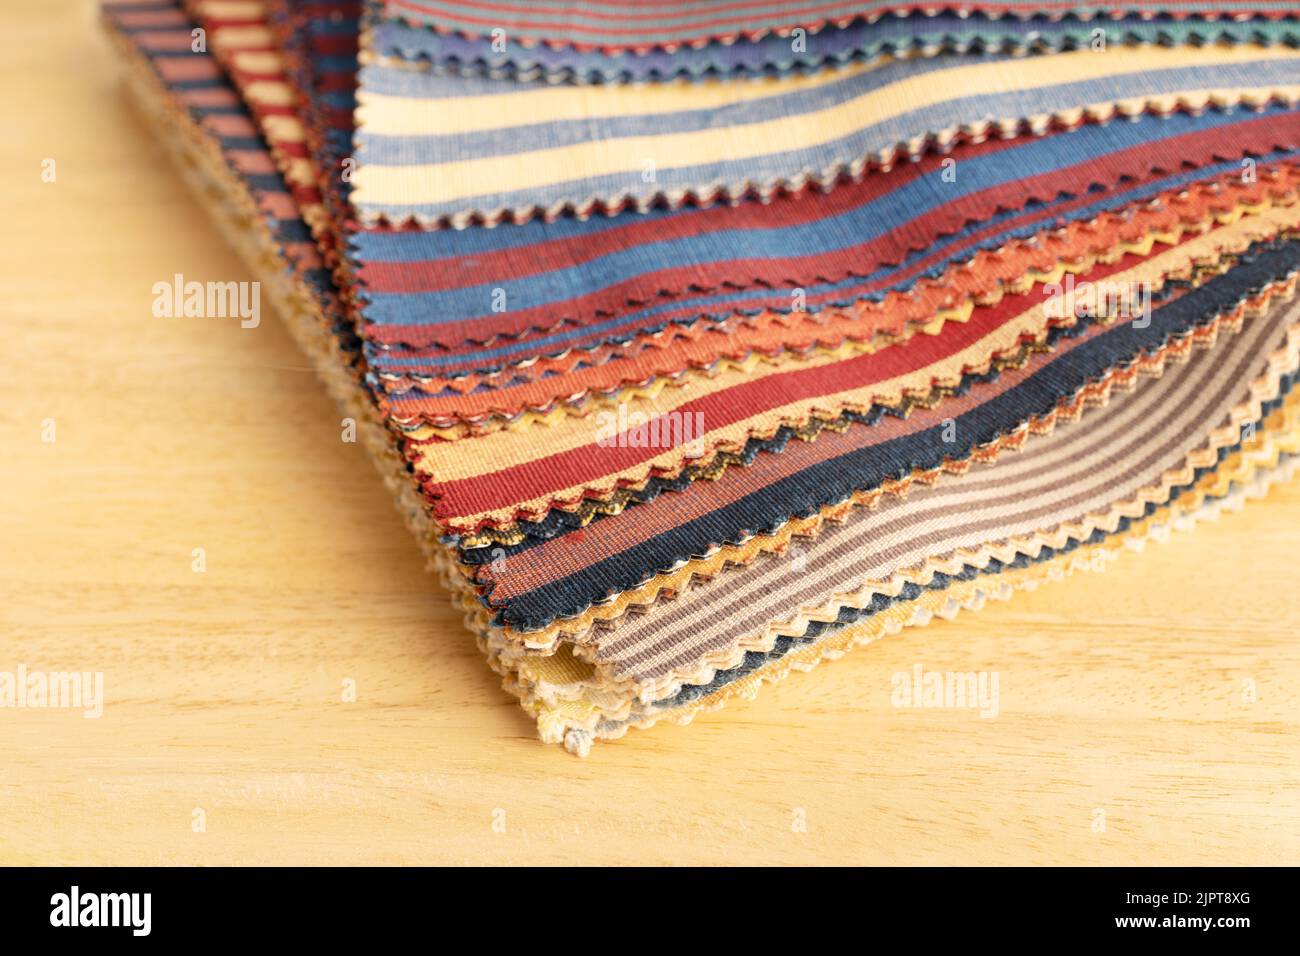 Fabric textile catalog on wooden table. Fabric samples upholstery and decoration. Stock Photo